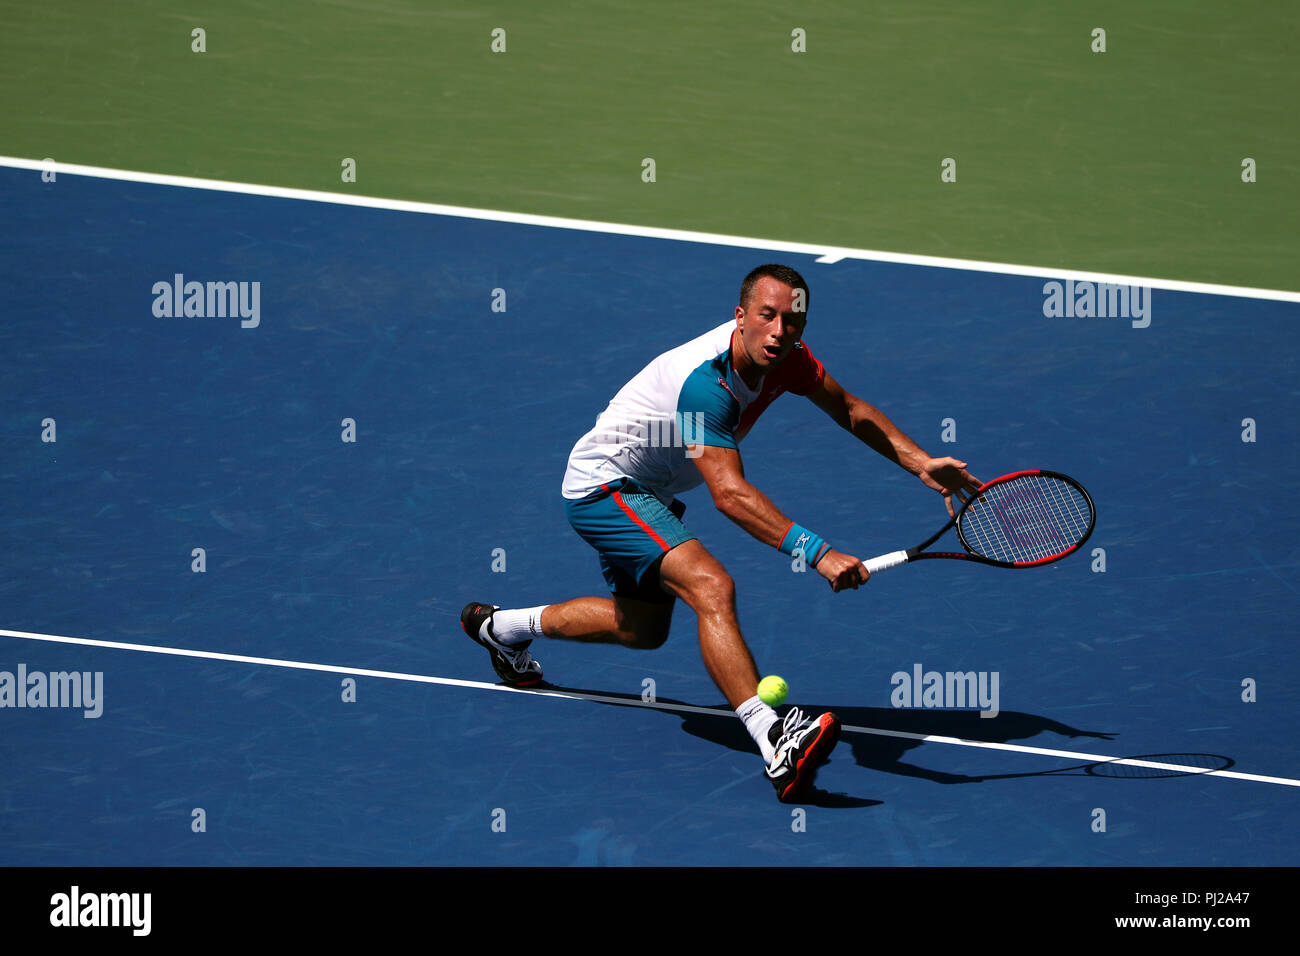 Flushing Meadows, New York - September 3, 2018: US Open Tennis: Philipp  Kohlschreiber of Germany in action against Kei Nihsikori of Japan during  their fourth round match at the US Open in